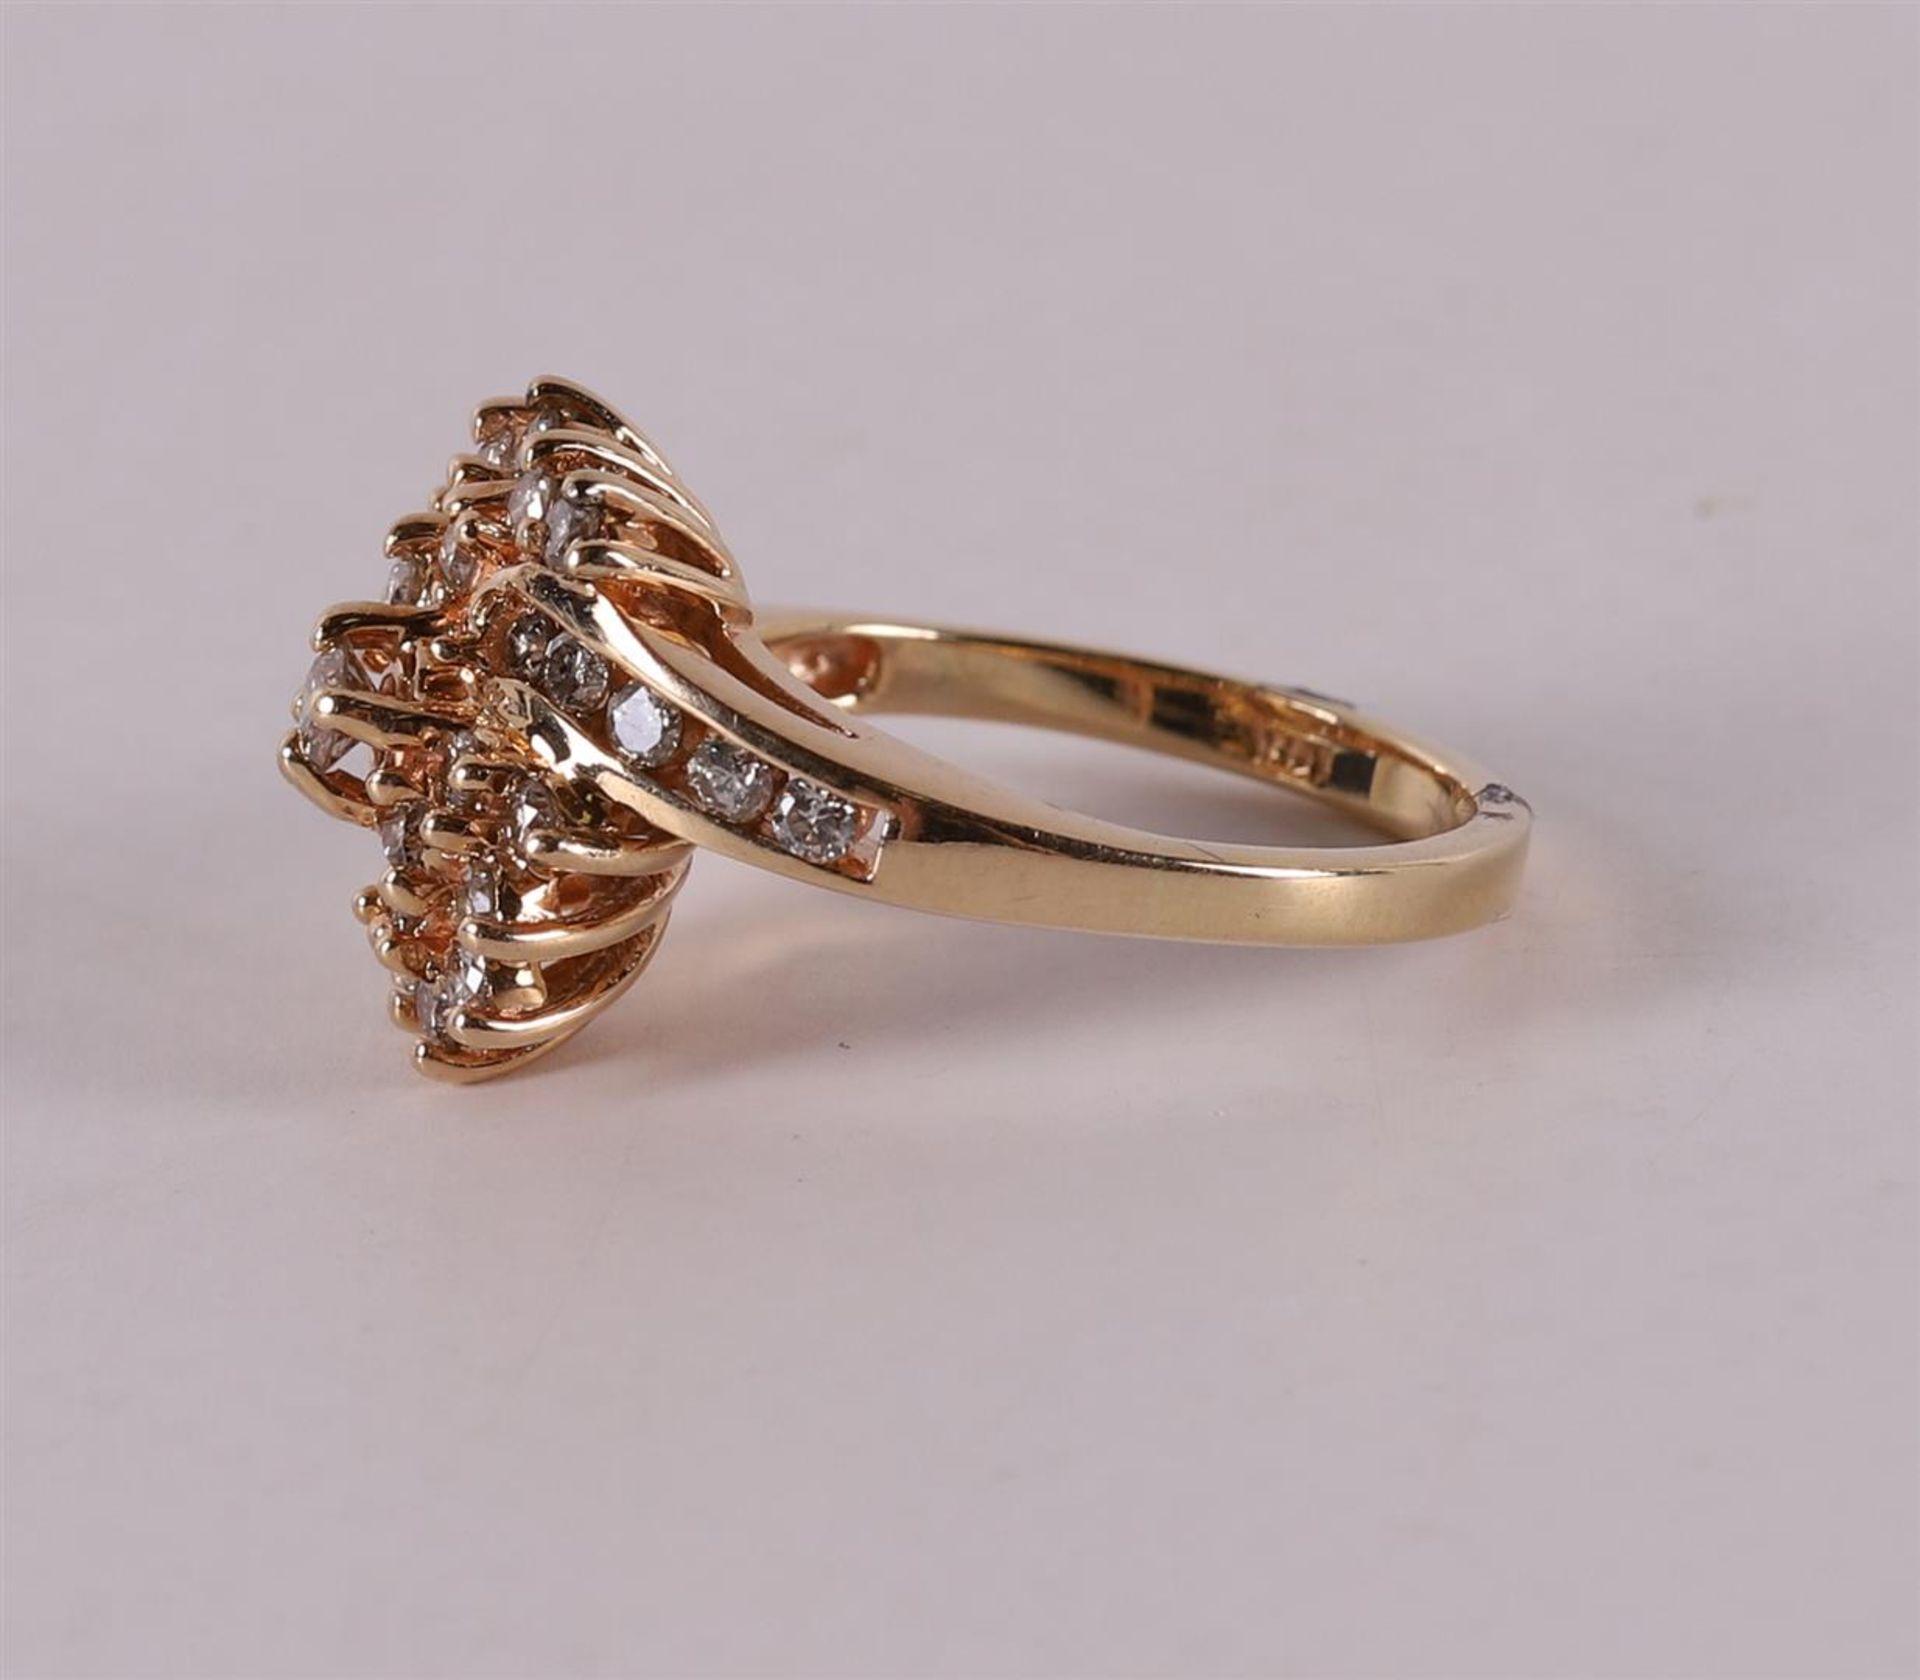 A 14 kt gold women's ring, set with 30 brilliant cut diamonds. - Image 3 of 3